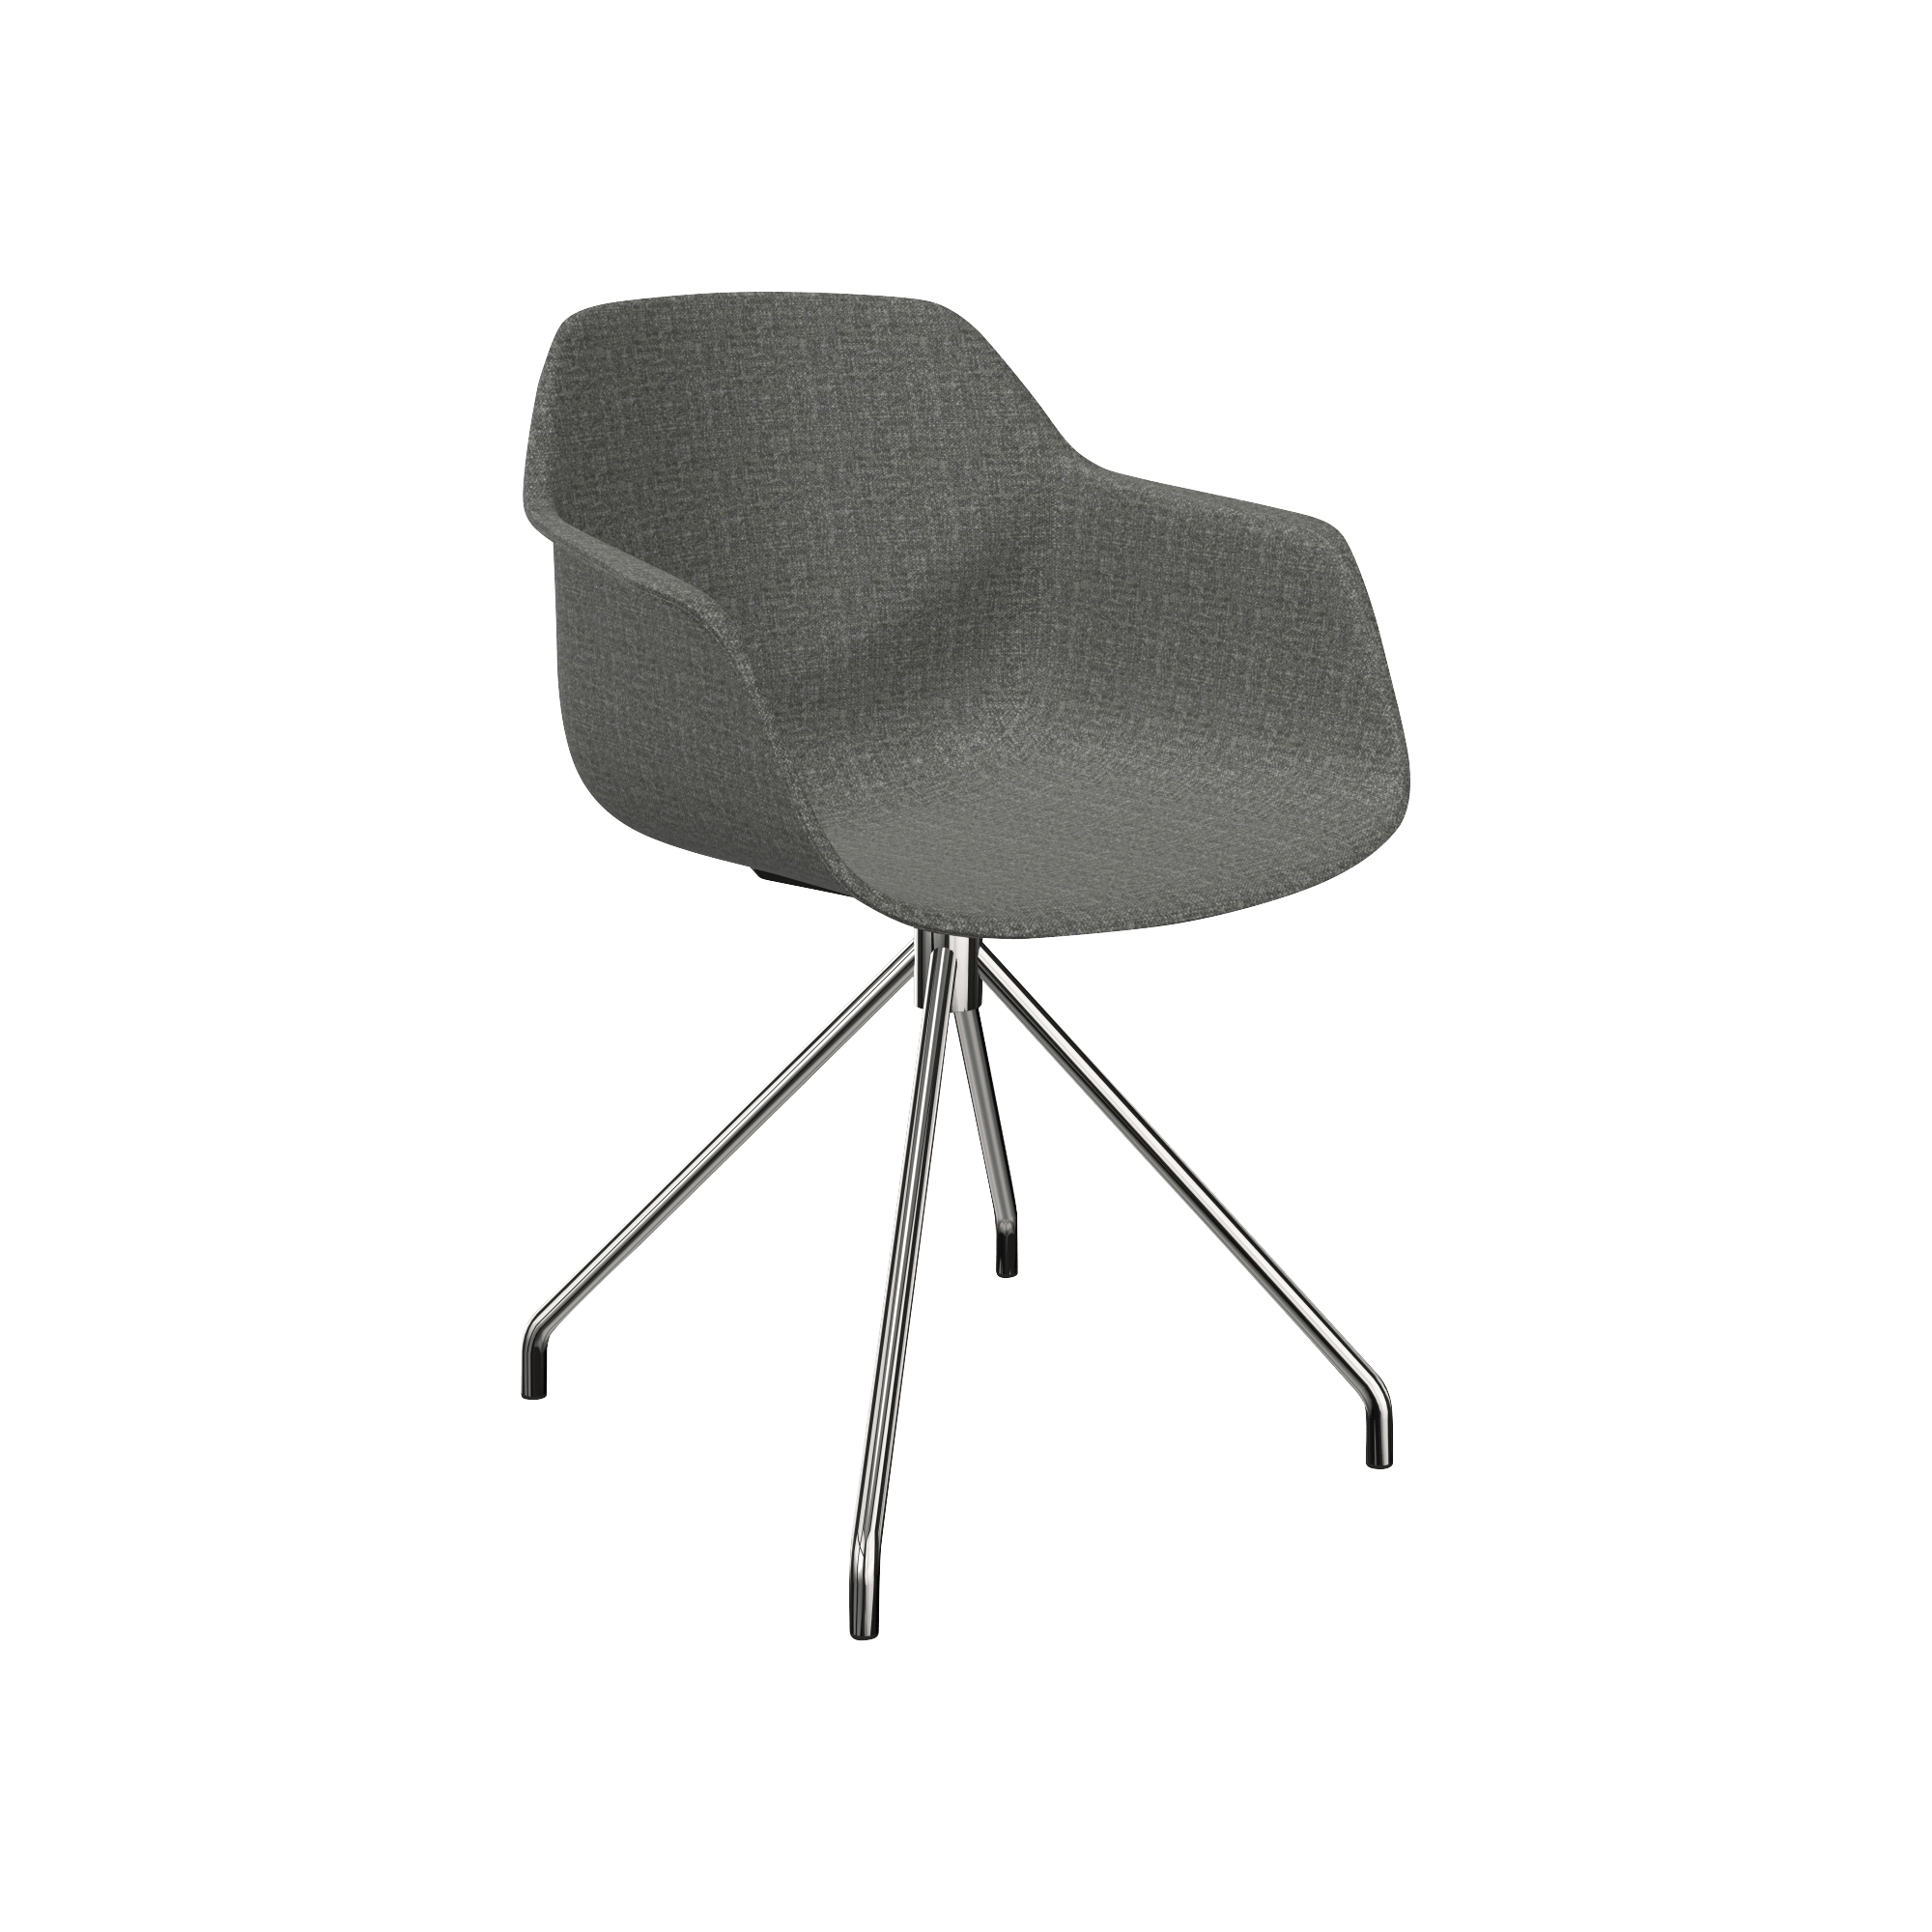 A grey chair with a metal frame